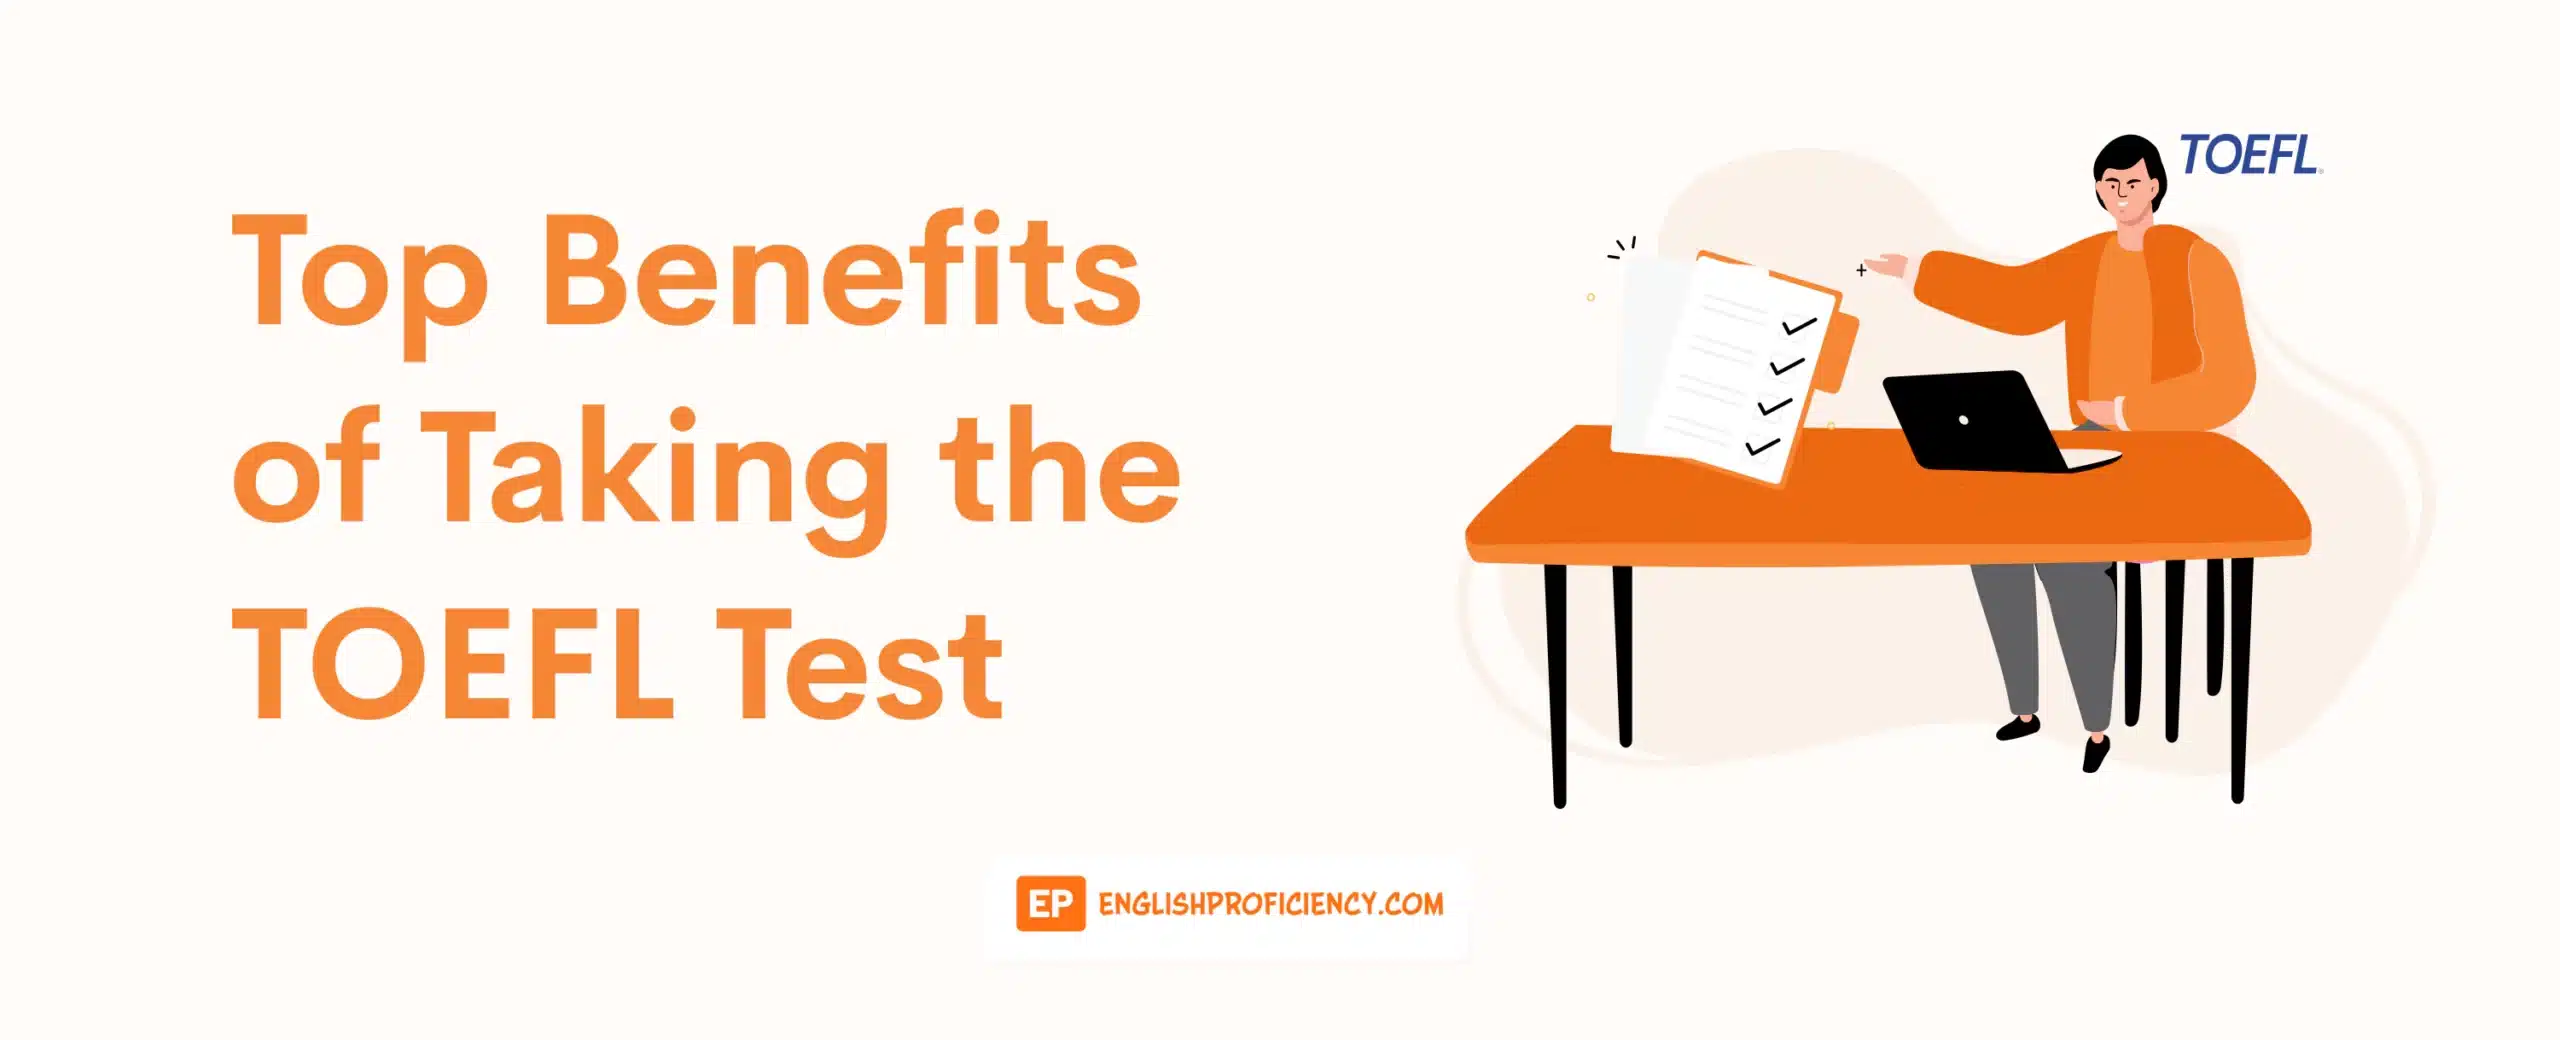 Top Benefits of Taking the TOEFL Test